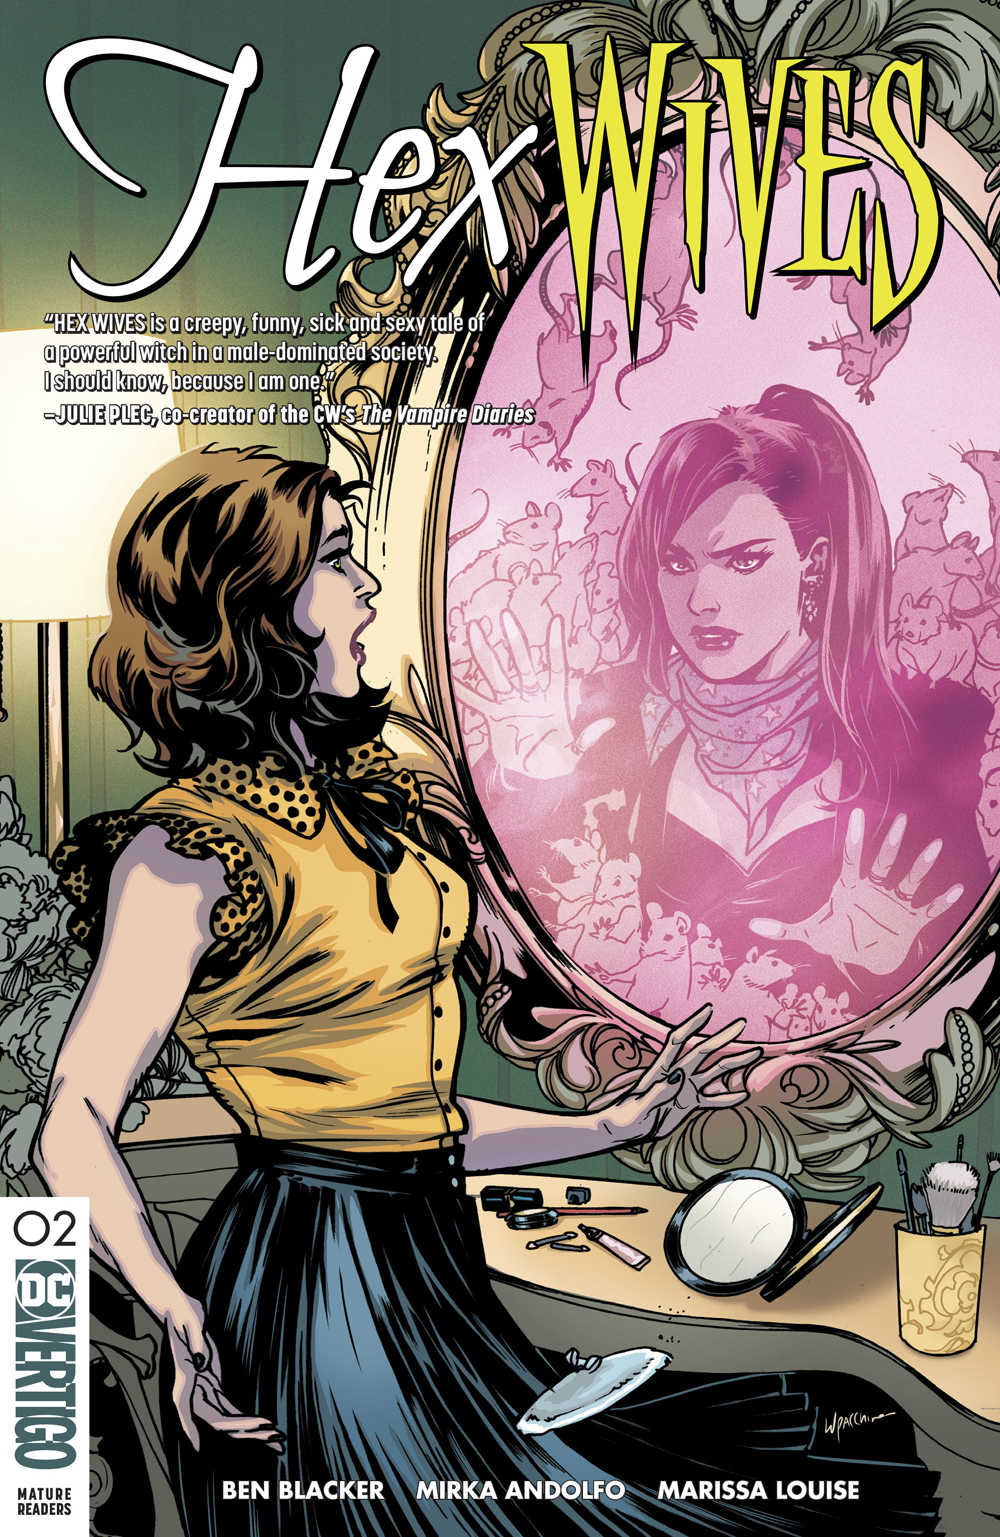 HEX WIVES #2 (MR)